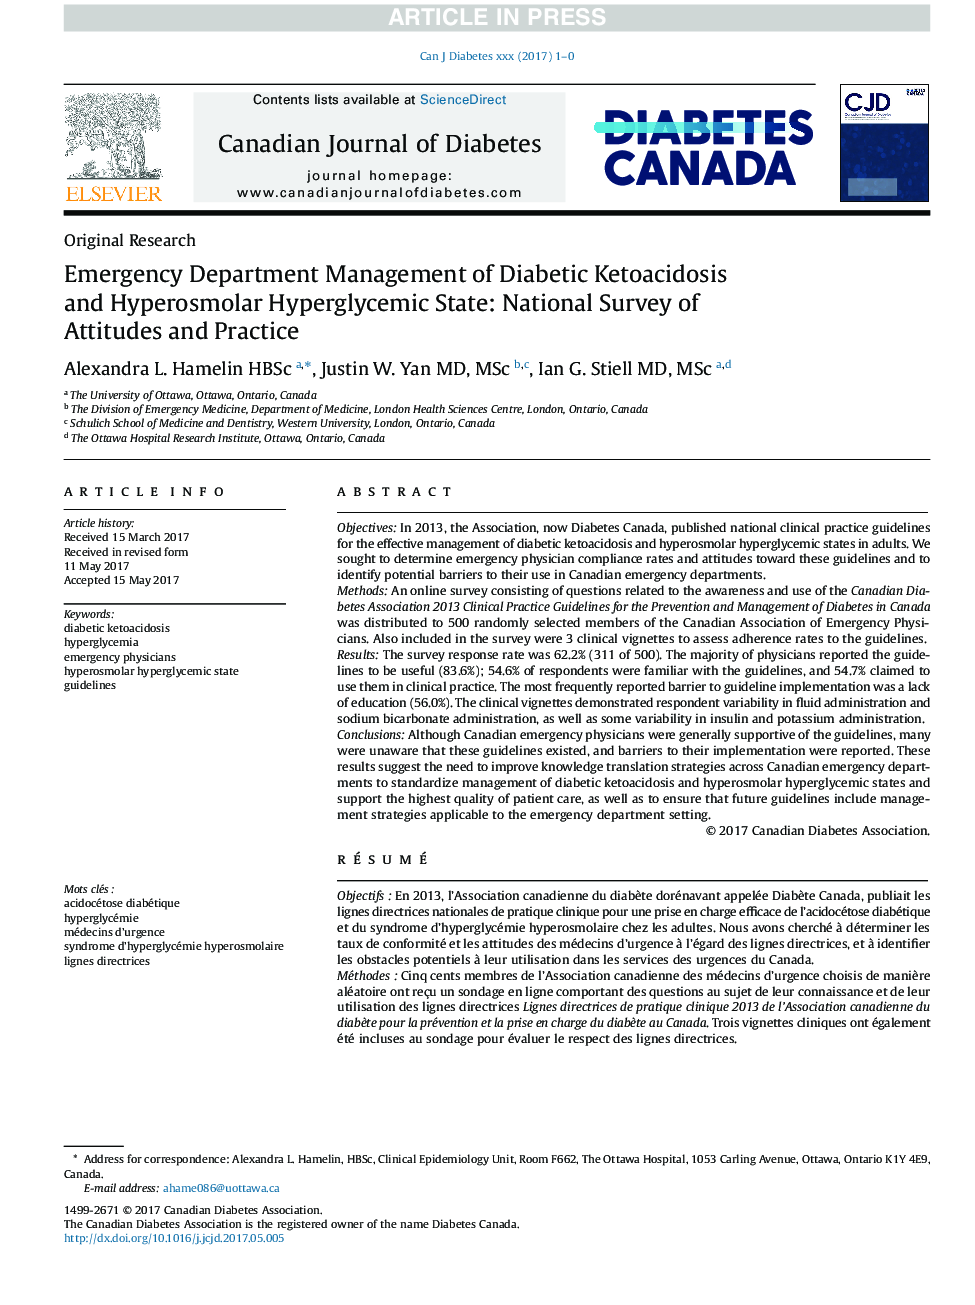 Emergency Department Management of Diabetic Ketoacidosis and Hyperosmolar Hyperglycemic State in Adults: National Survey of Attitudes and Practice